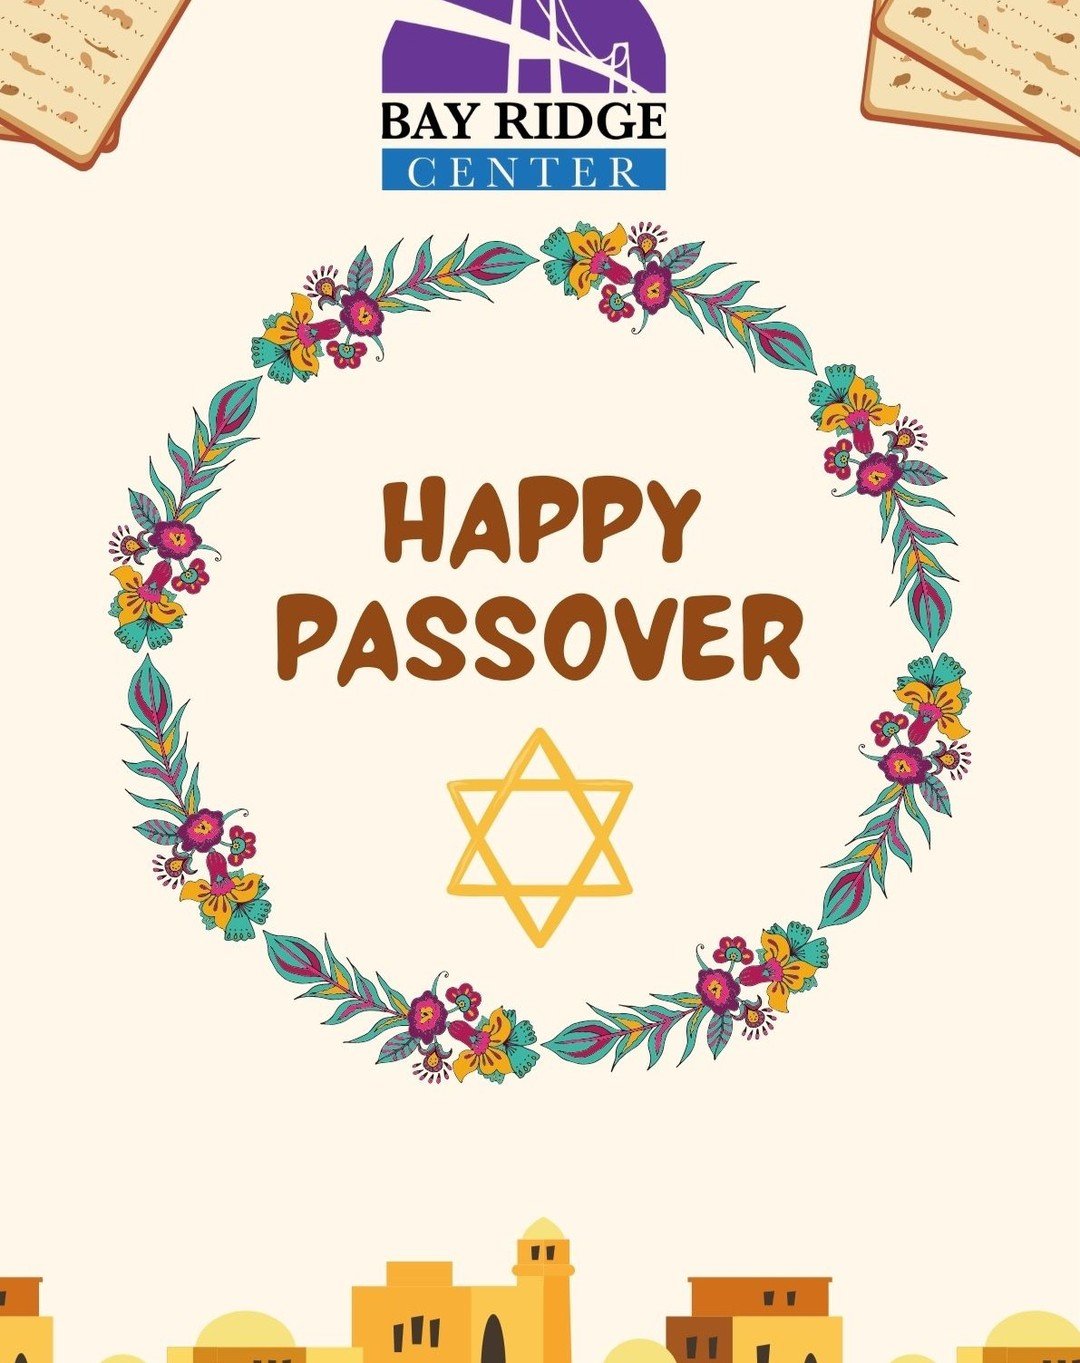 Tonight marks the beginning of Passover, a time of reflection, family gatherings, and honoring traditions. Wishing everyone who is celebrating a meaningful and joyous Pesach filled with love, freedom, and renewal. Chag Sameach!